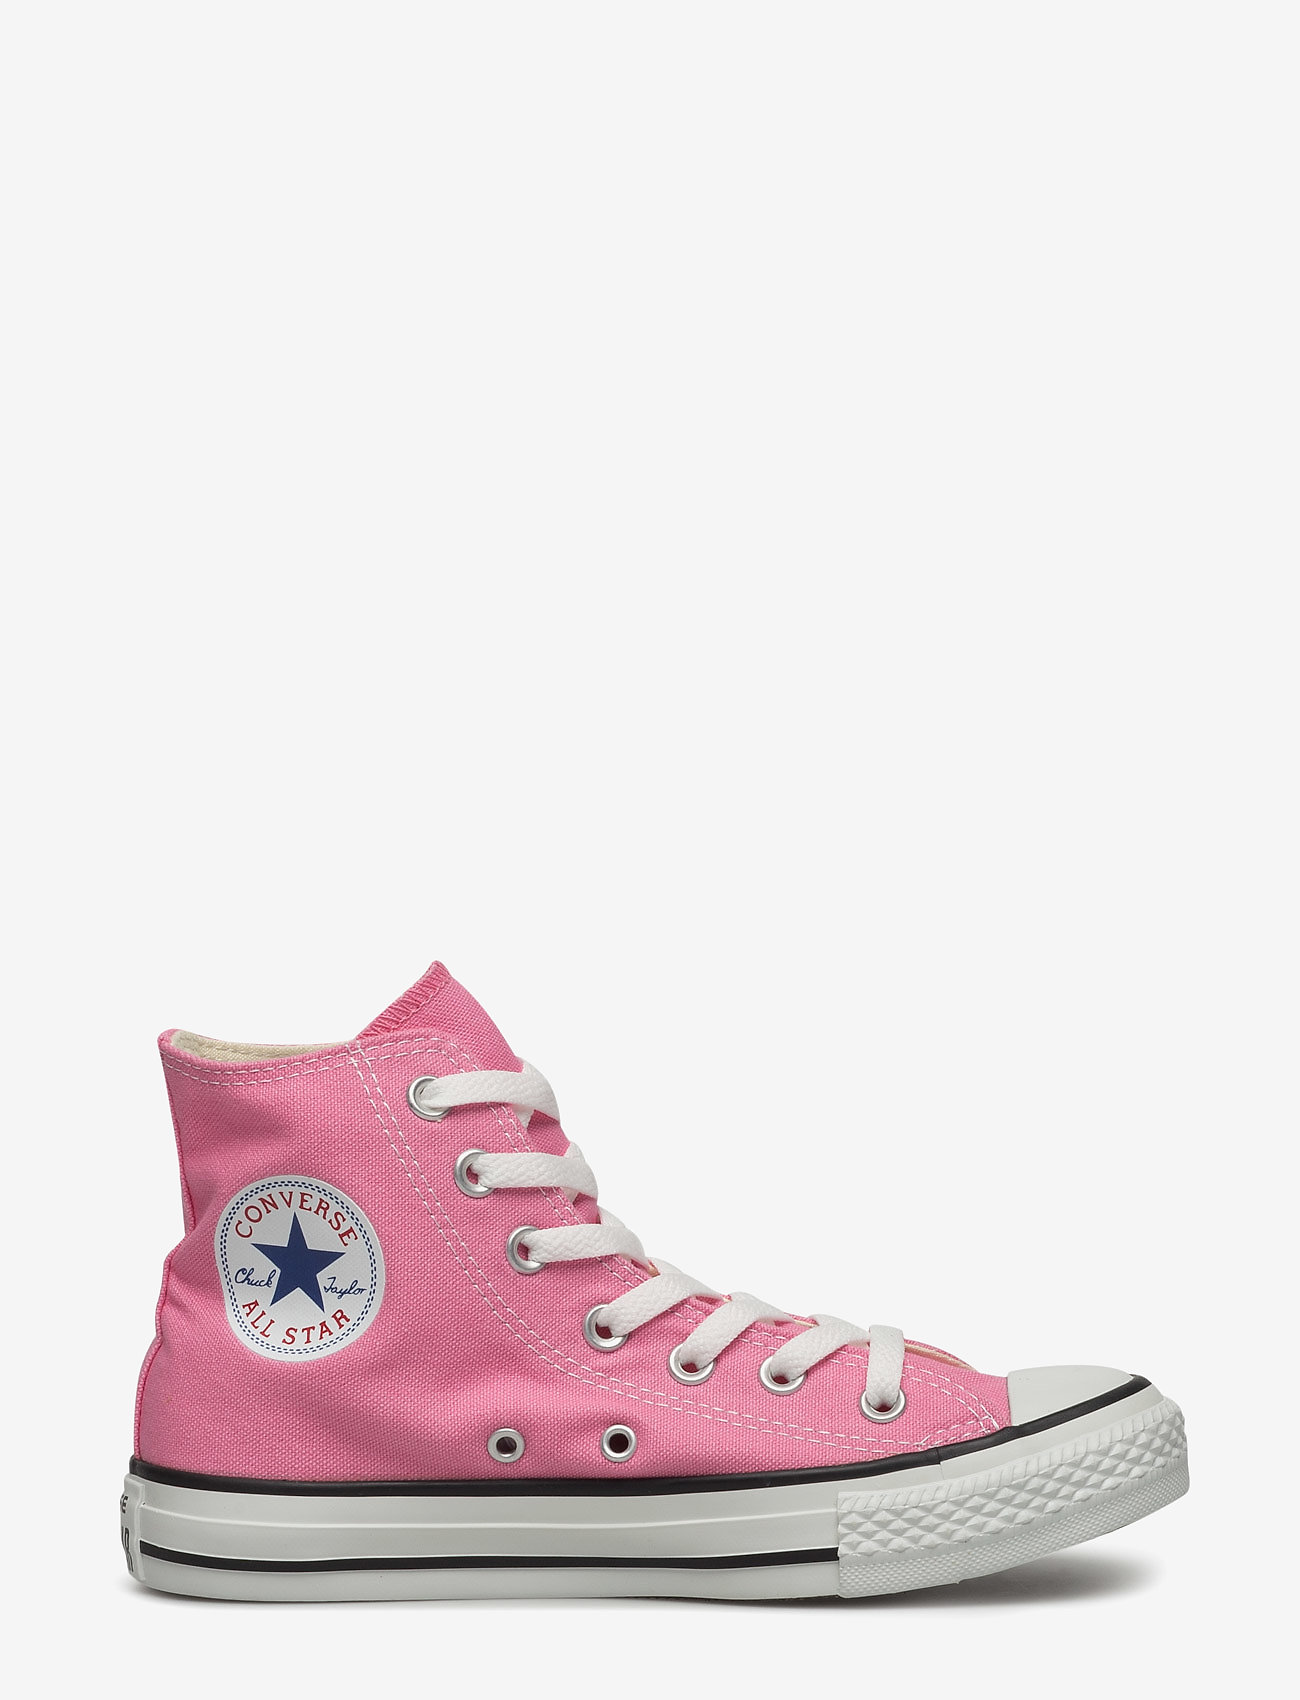 Converse - Chuck Taylor All Star - sneakers med høy ankel - pink - 1